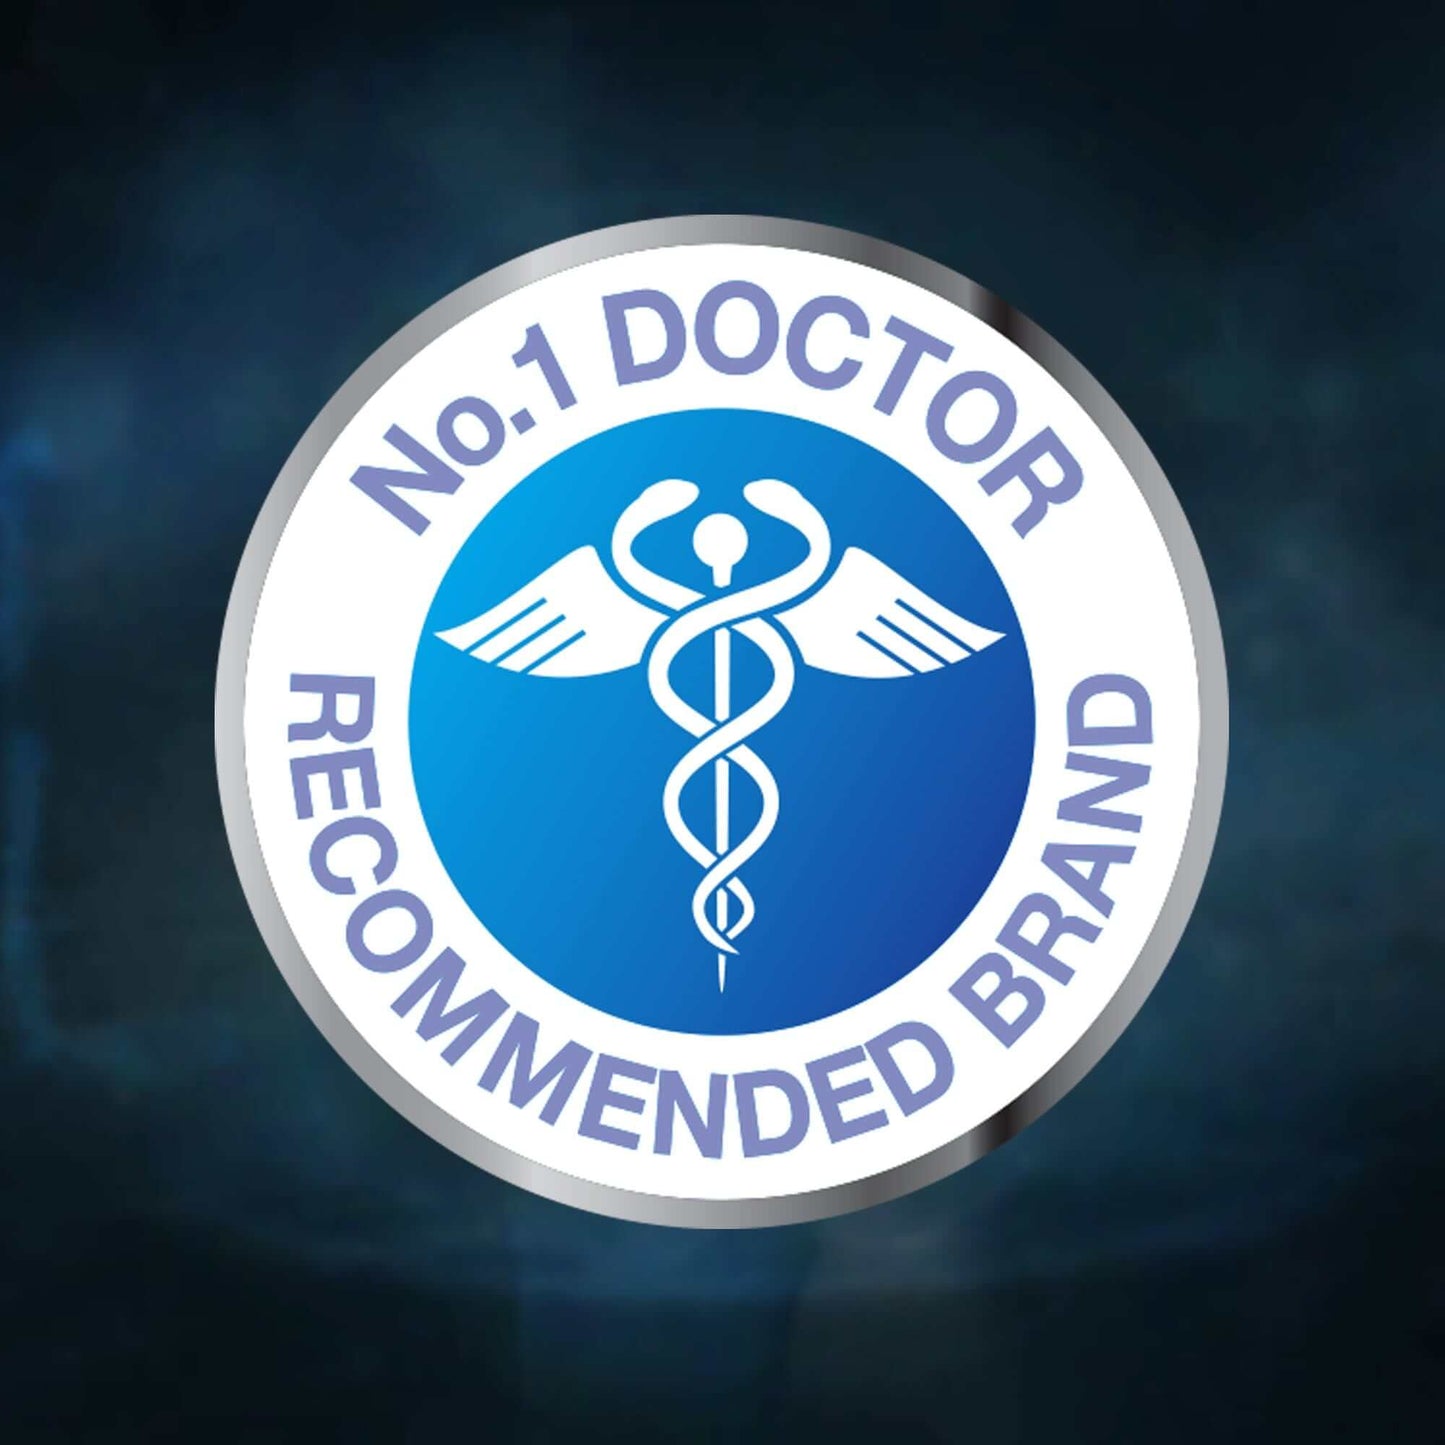 Number 1 doctor recommended brand with stormy background